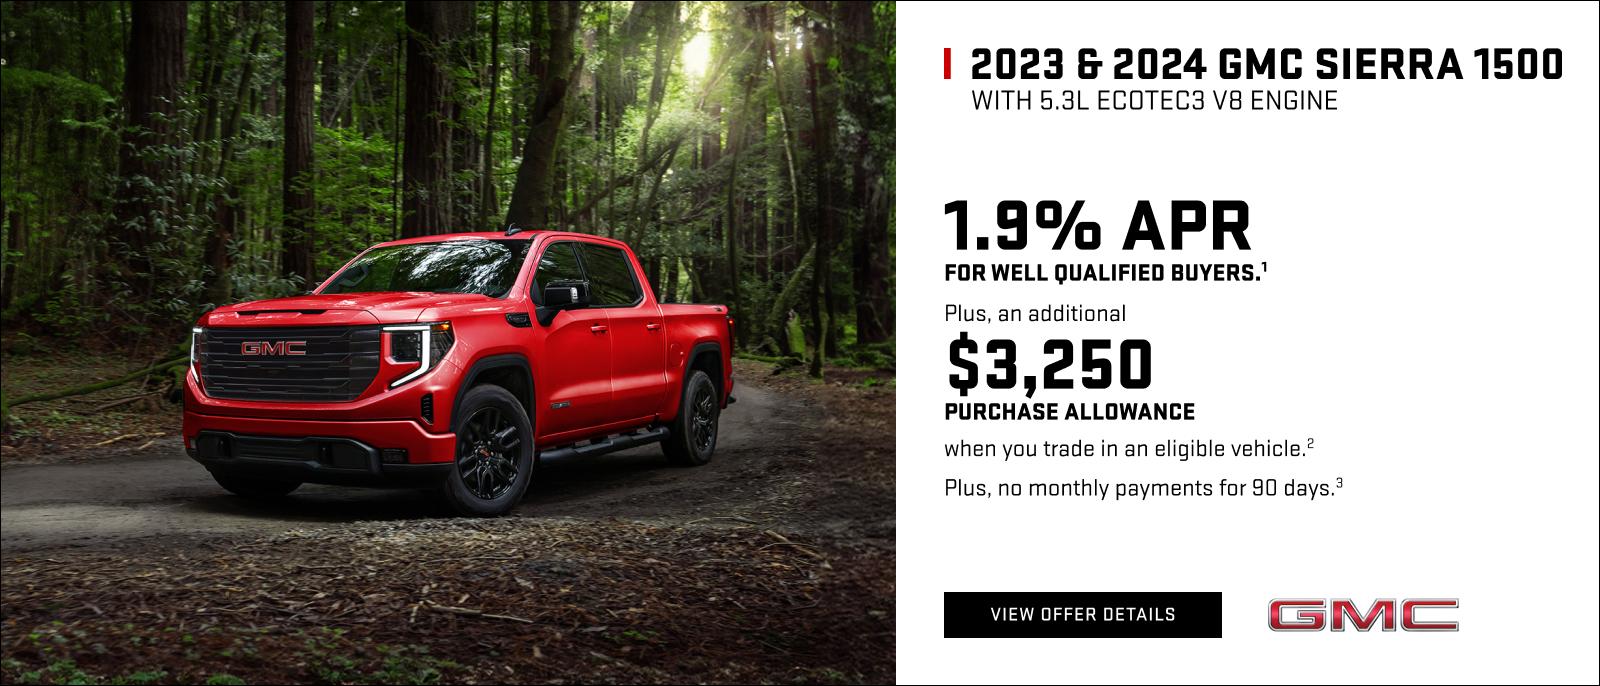 1.9% APR for well-qualified buyers.1

Plus, an additional $3,250 PURCHASE ALLOWANCE when you trade in an eligible vehicle.2

Plus, no monthly payments for 90 days. 3